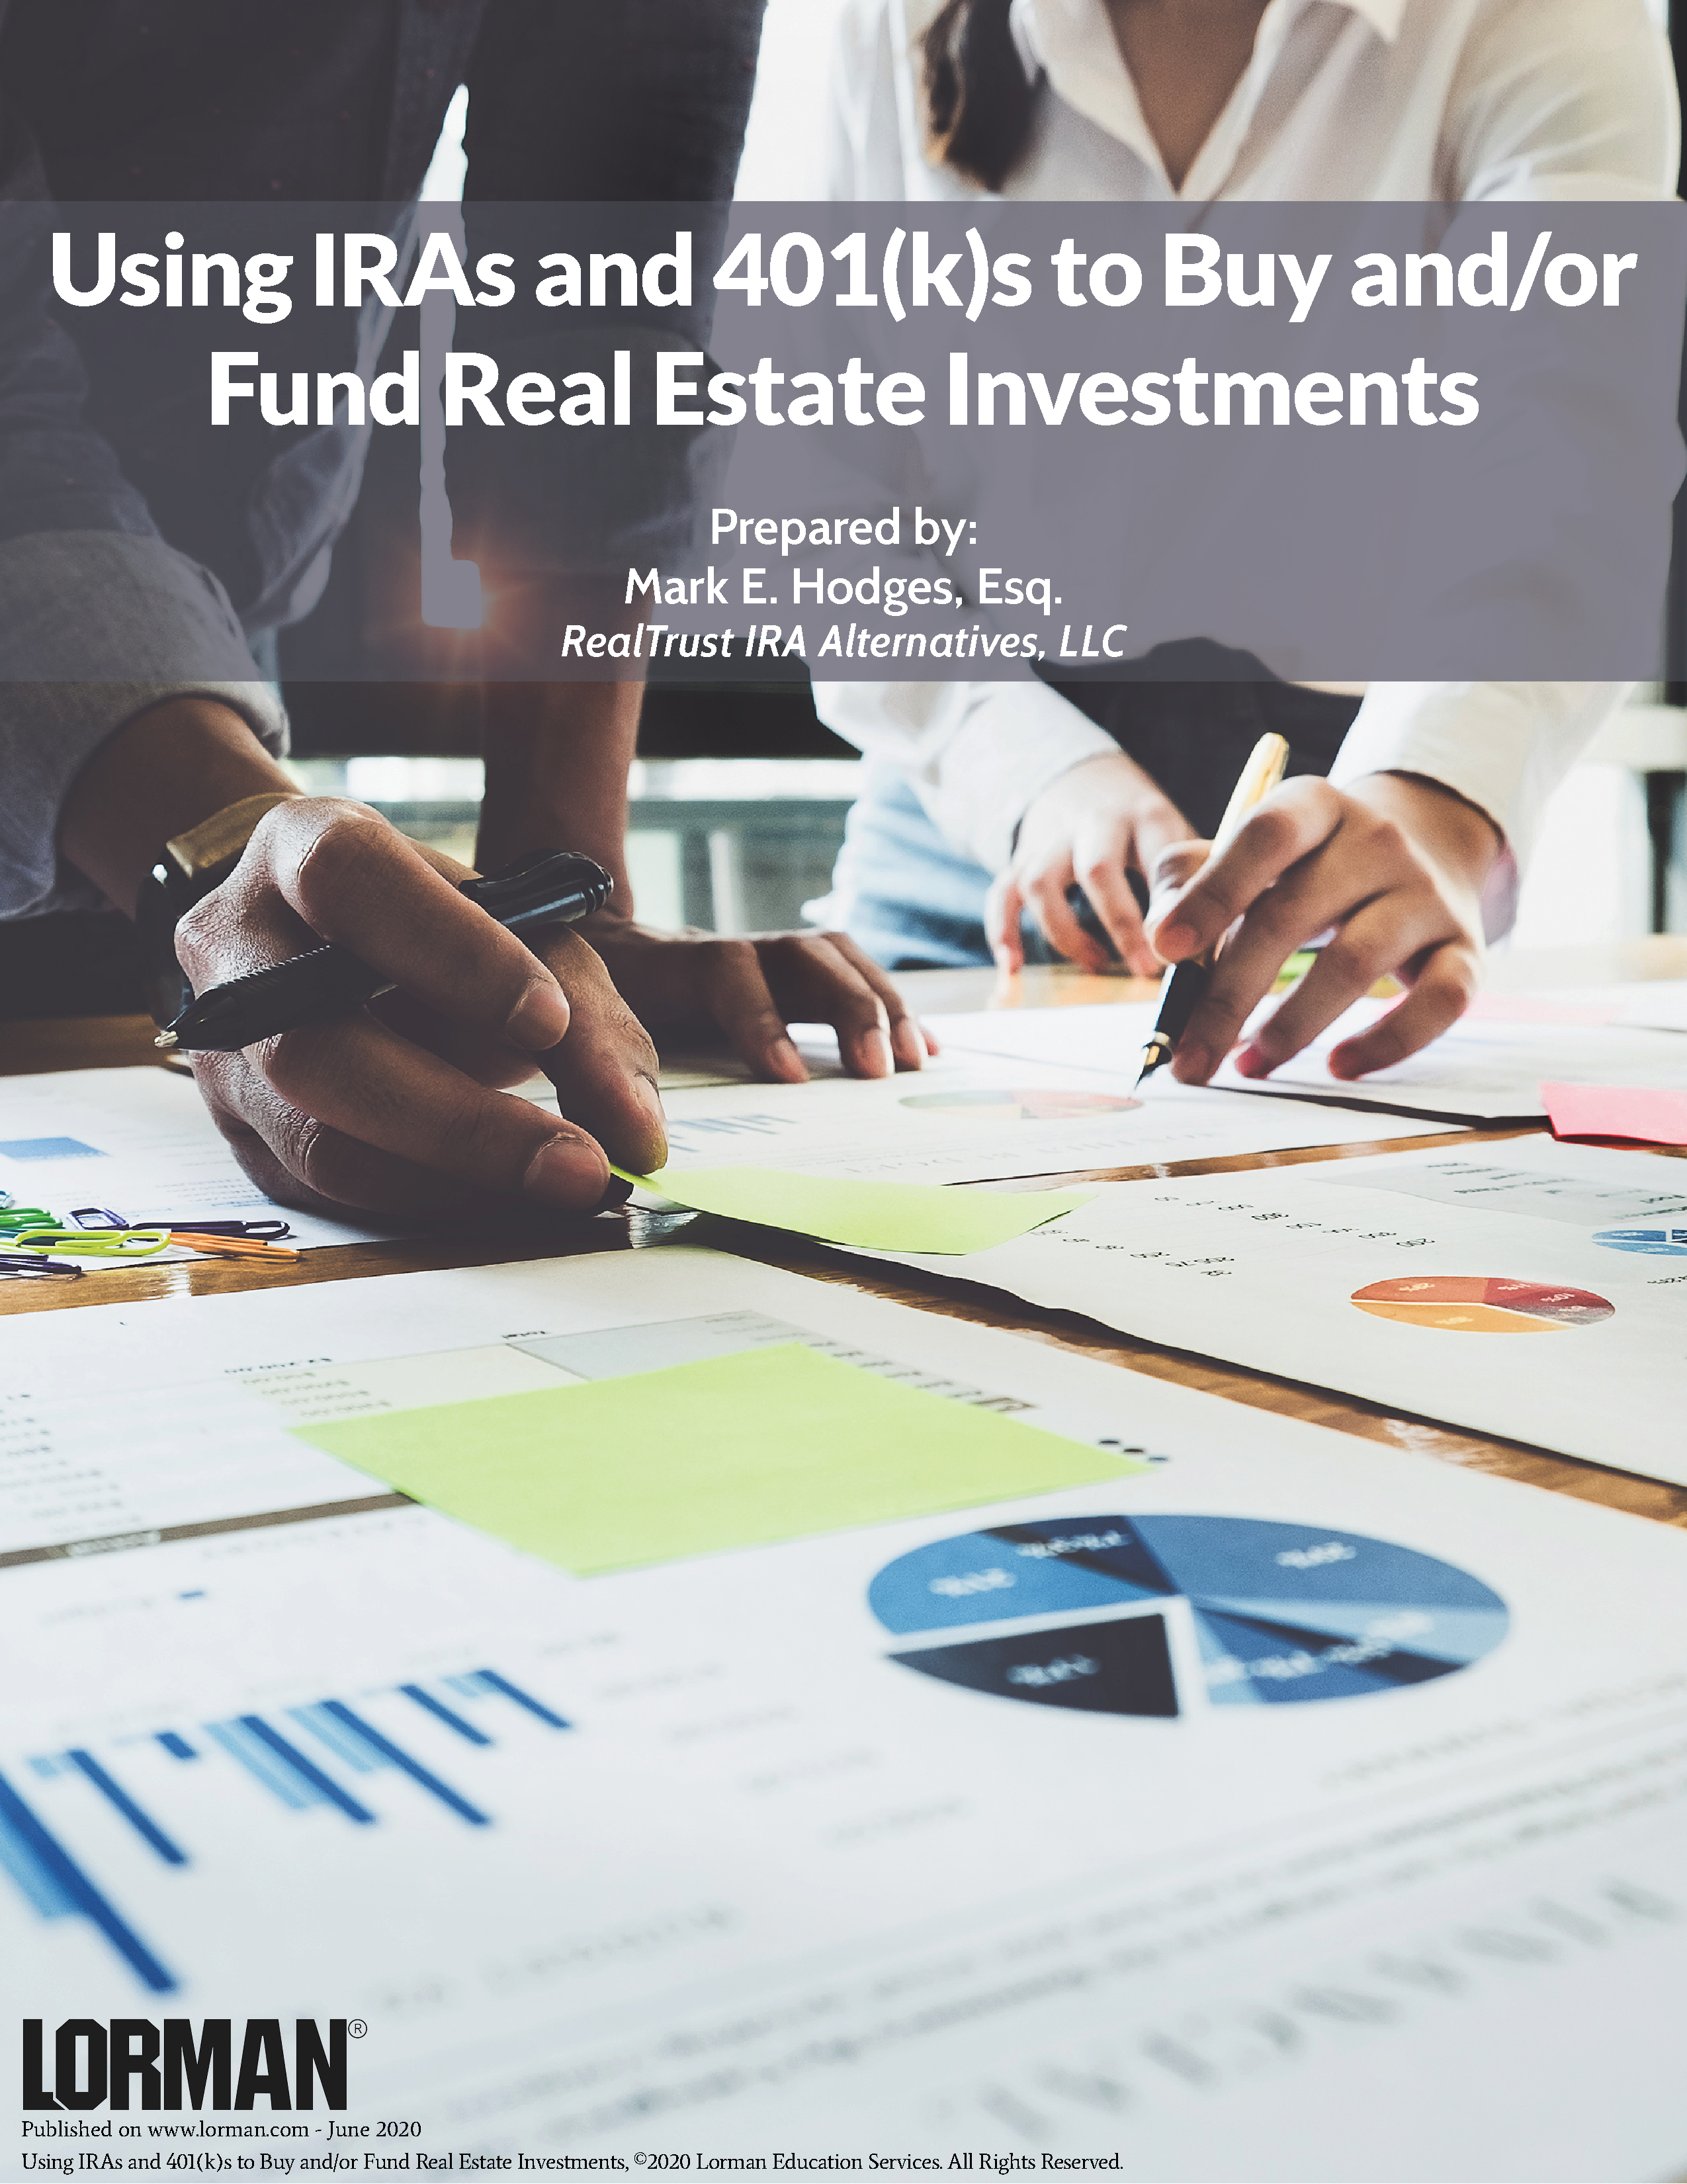 Using IRAs and 401(k)s to Buy and/or Fund Real Estate Investments